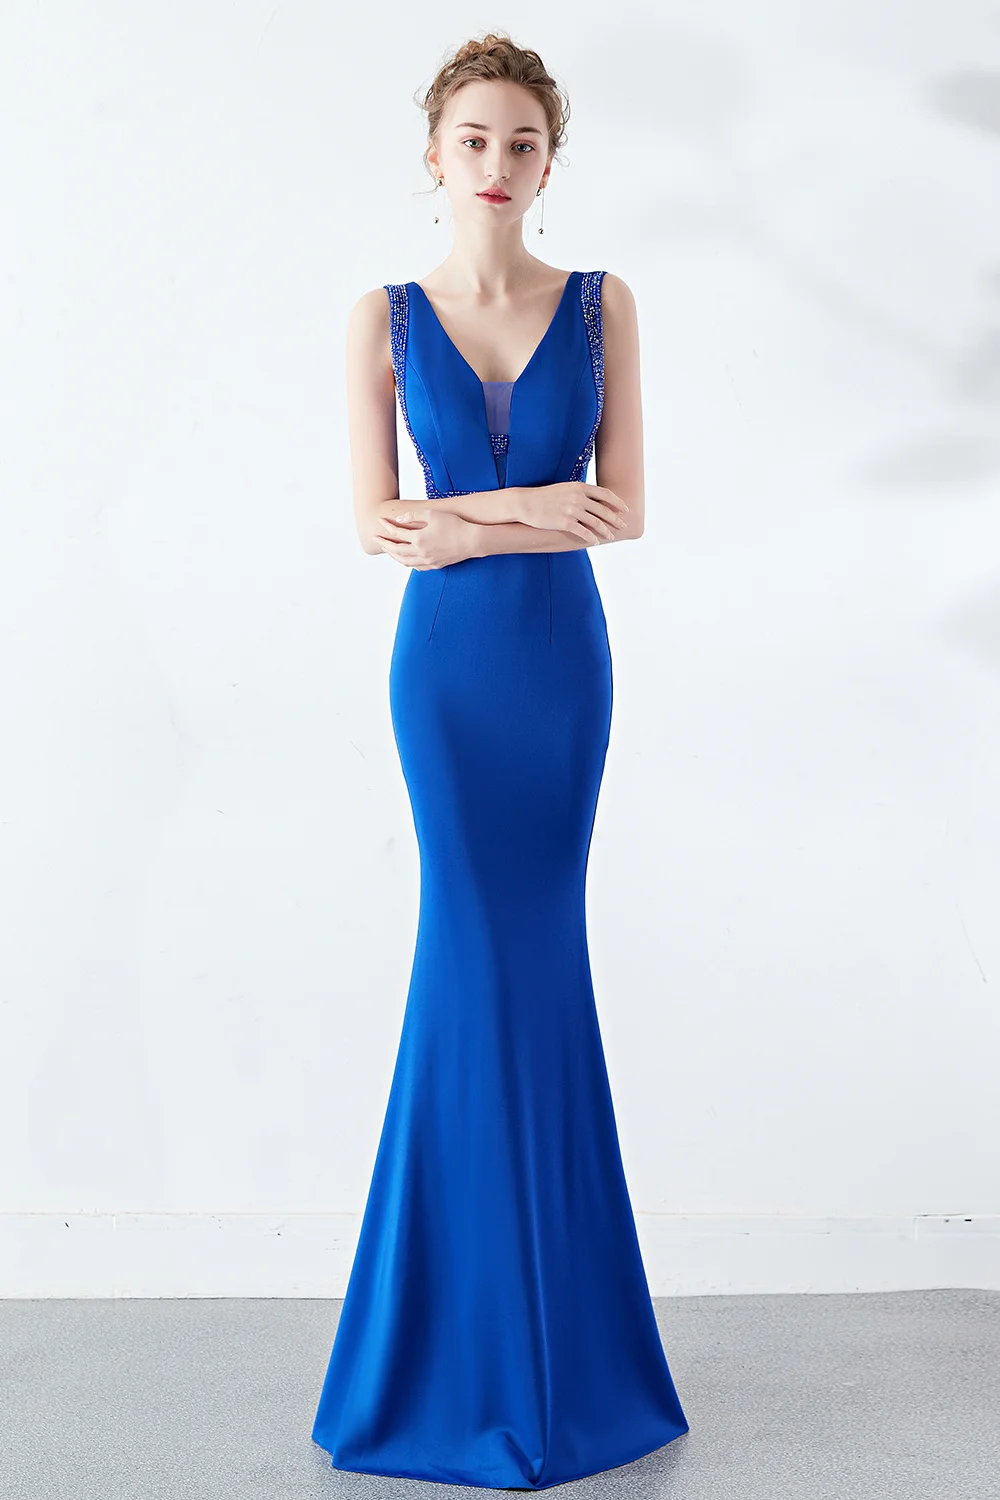 Charming Sleeveless Long Mermaid Evening Prom Dress With Crystal